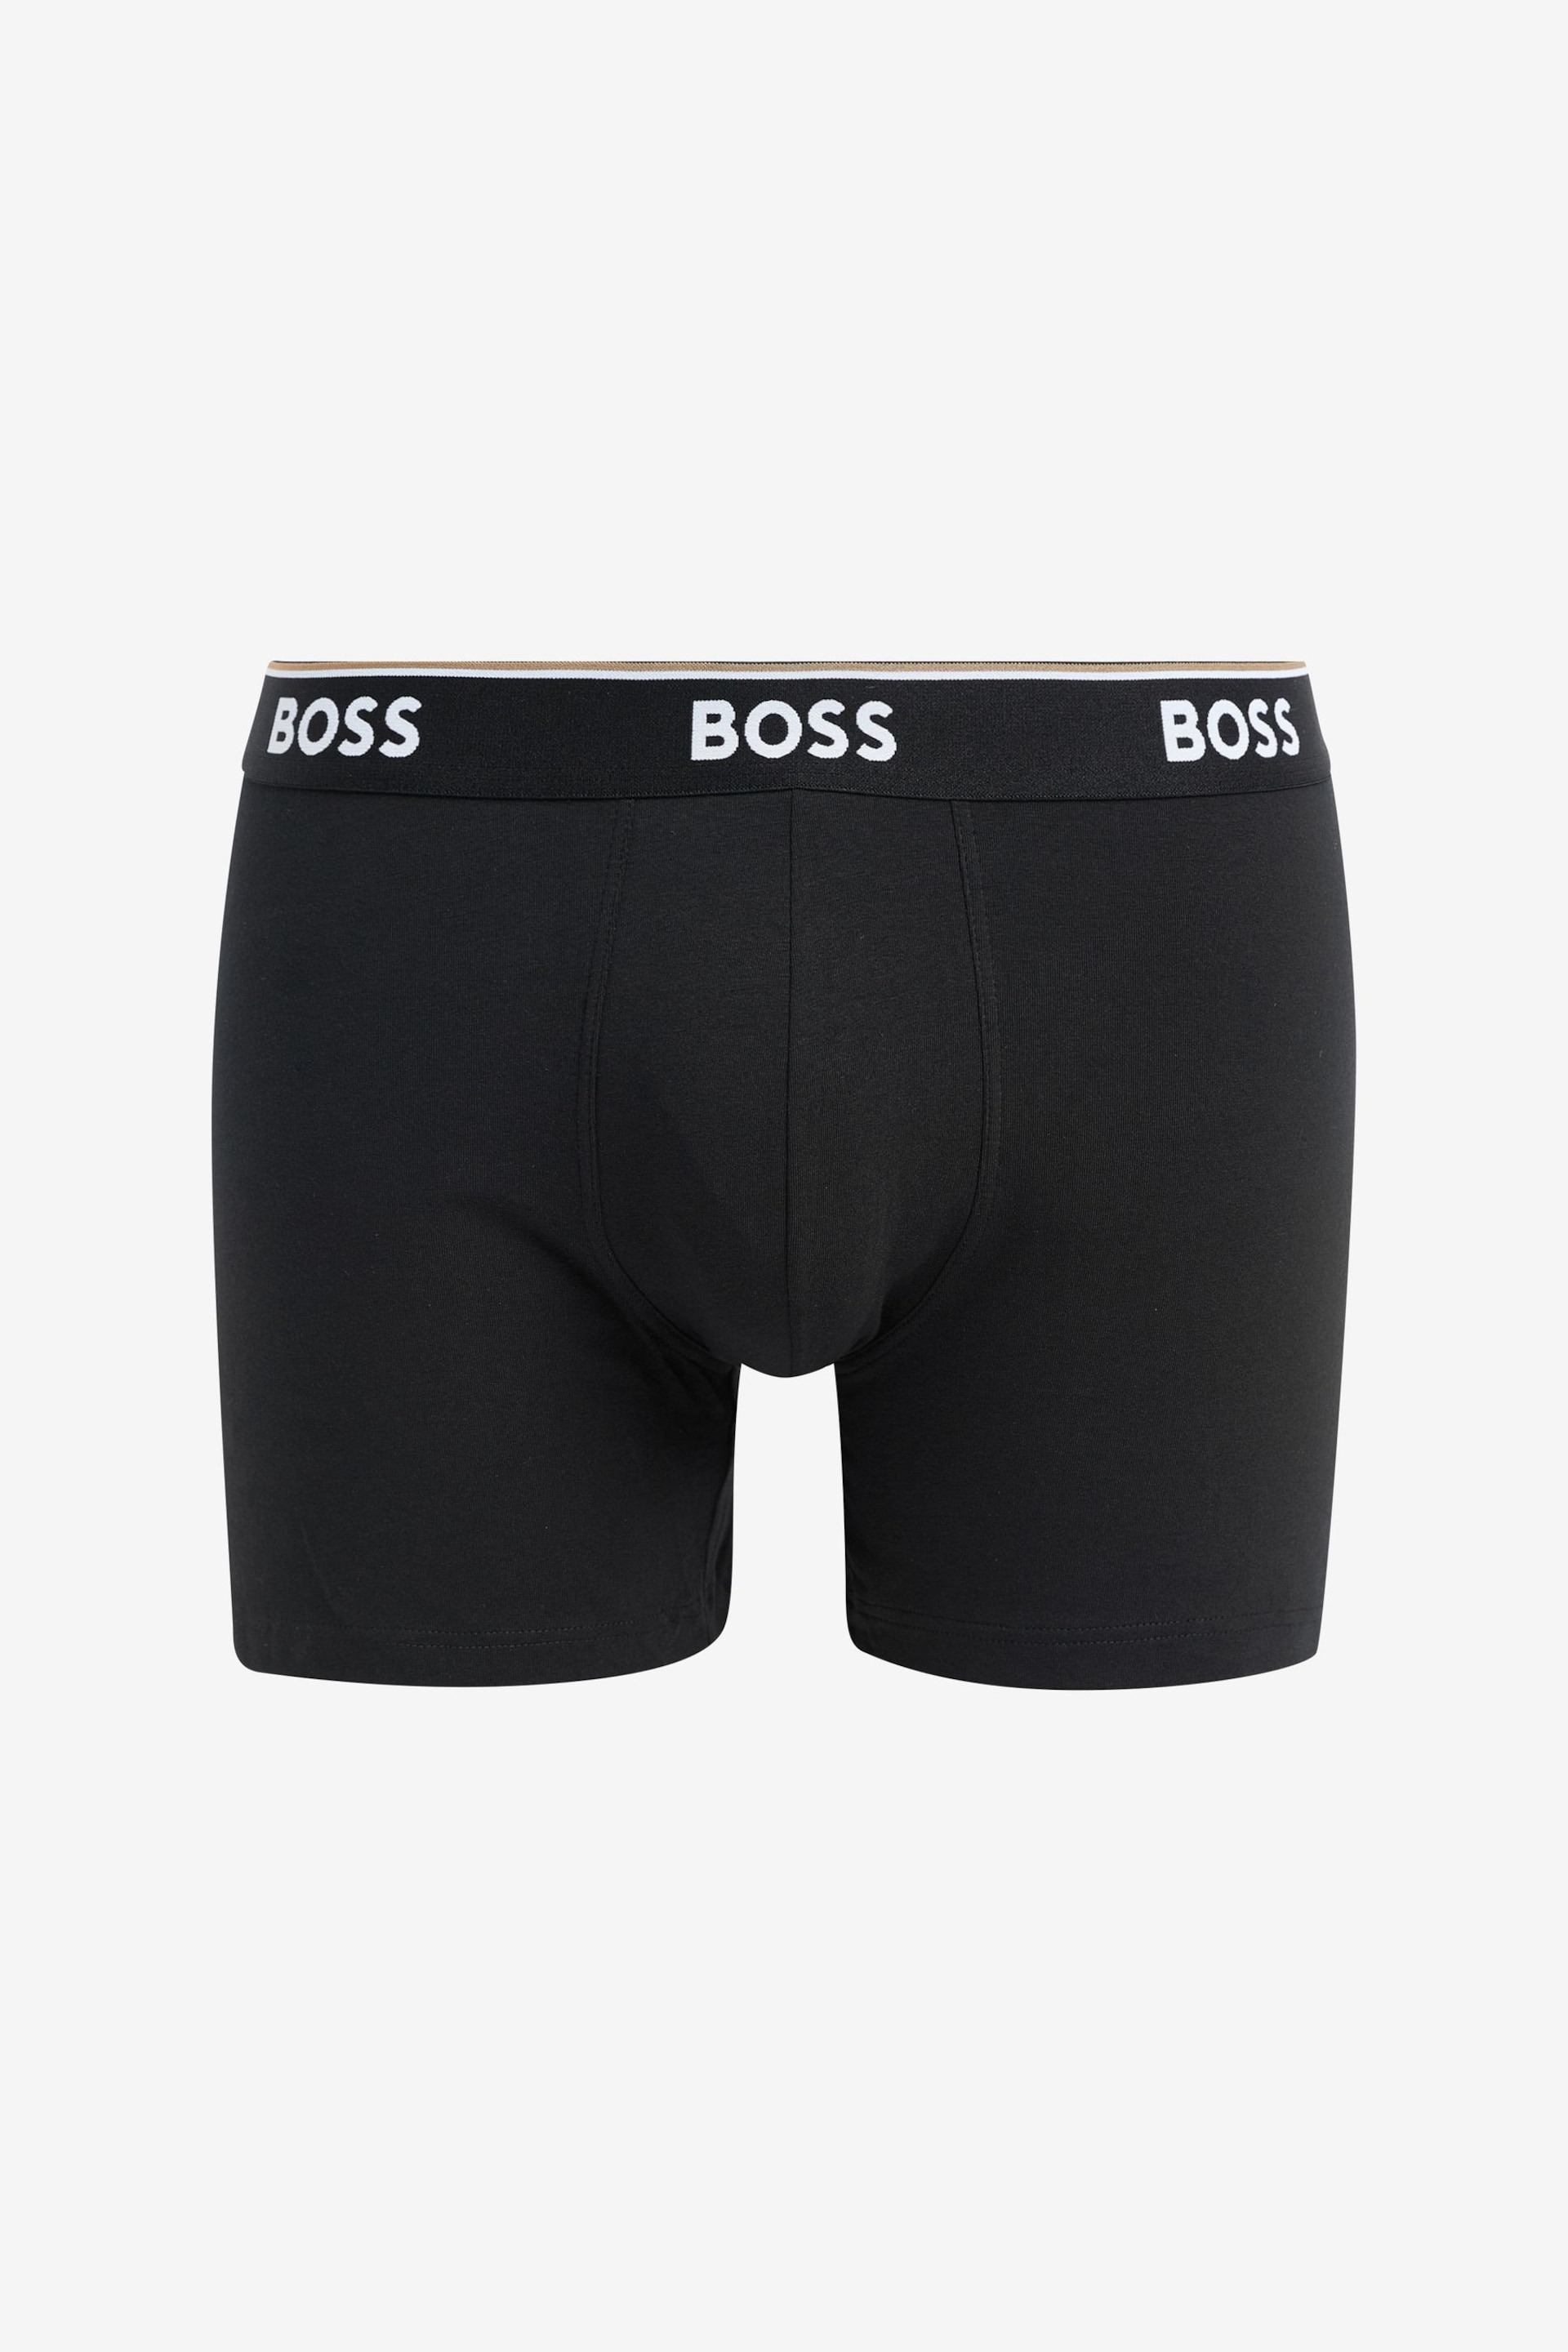 BOSS Grey Logo Waistband Boxer Briefs 3 Pack in Stretch Cotton - Image 4 of 4